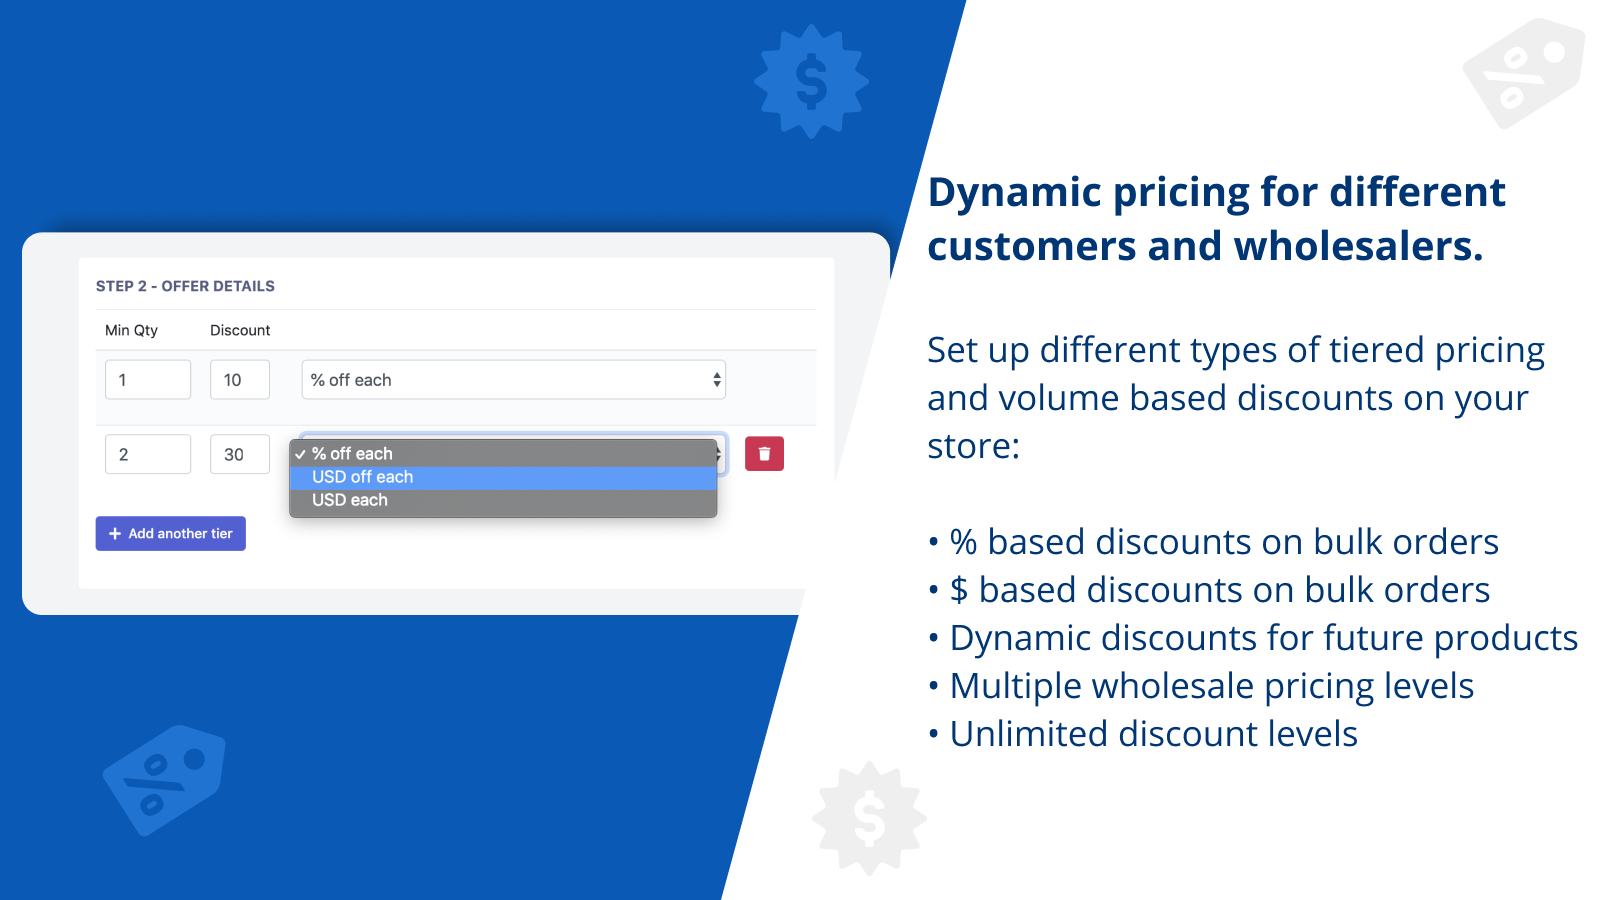 Dynamic pricing for different customers